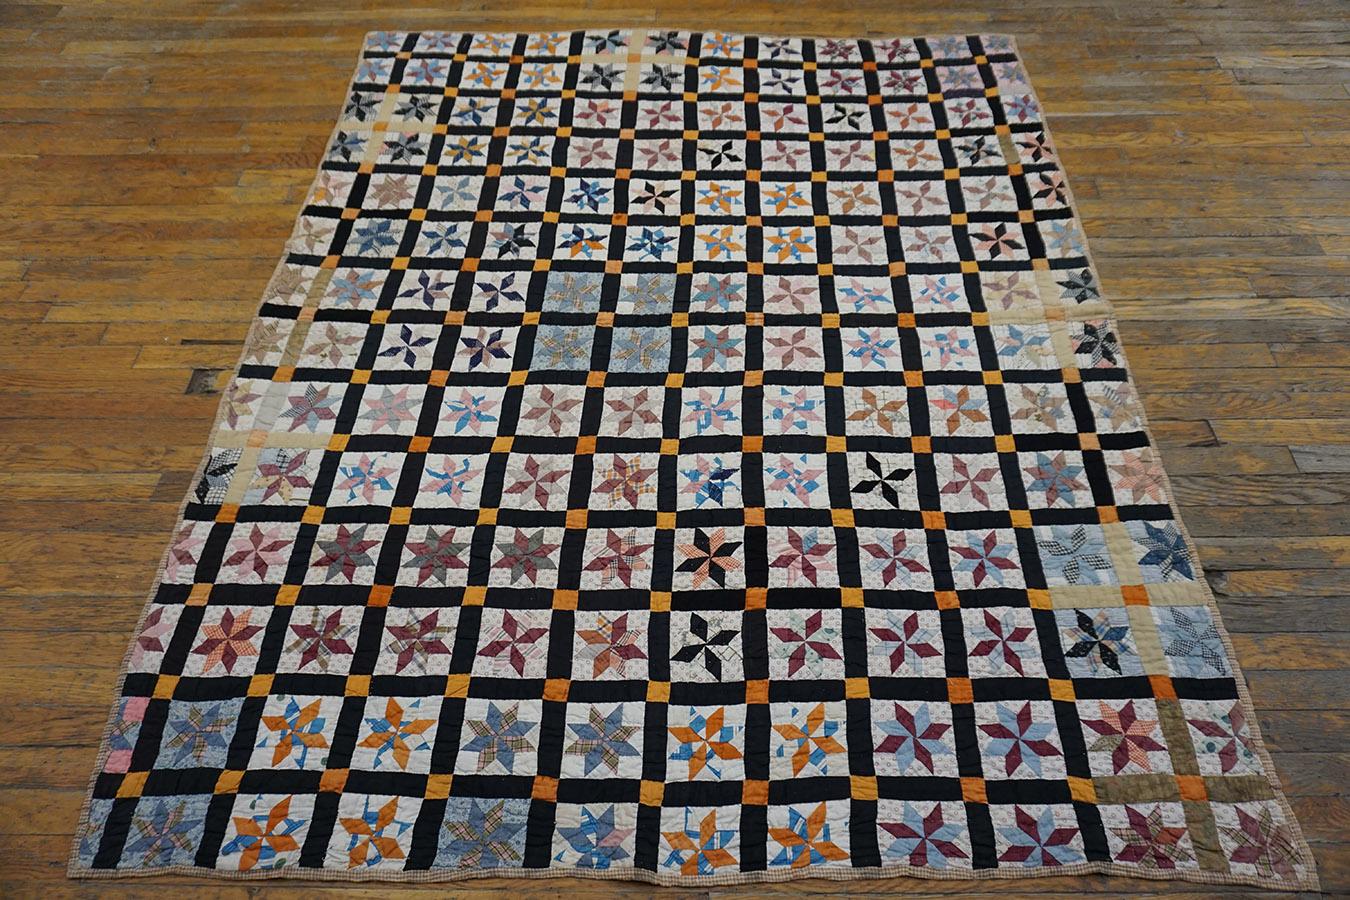 Early 20th Century American Quilt ( 5'3